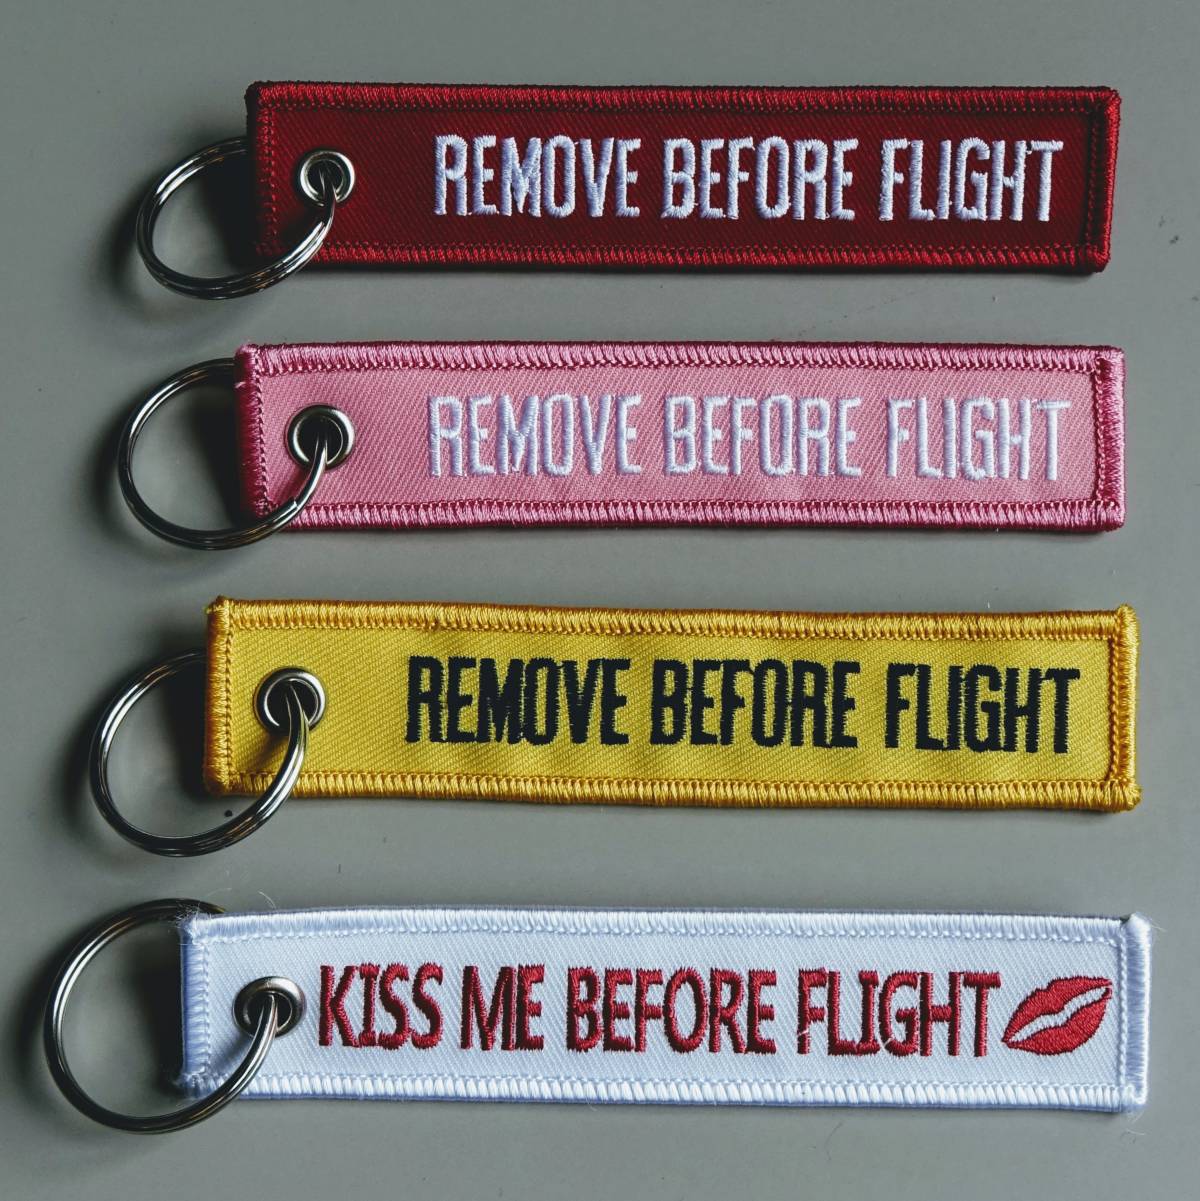 REMOVE BEFORE FLIGHT embroidered key chains